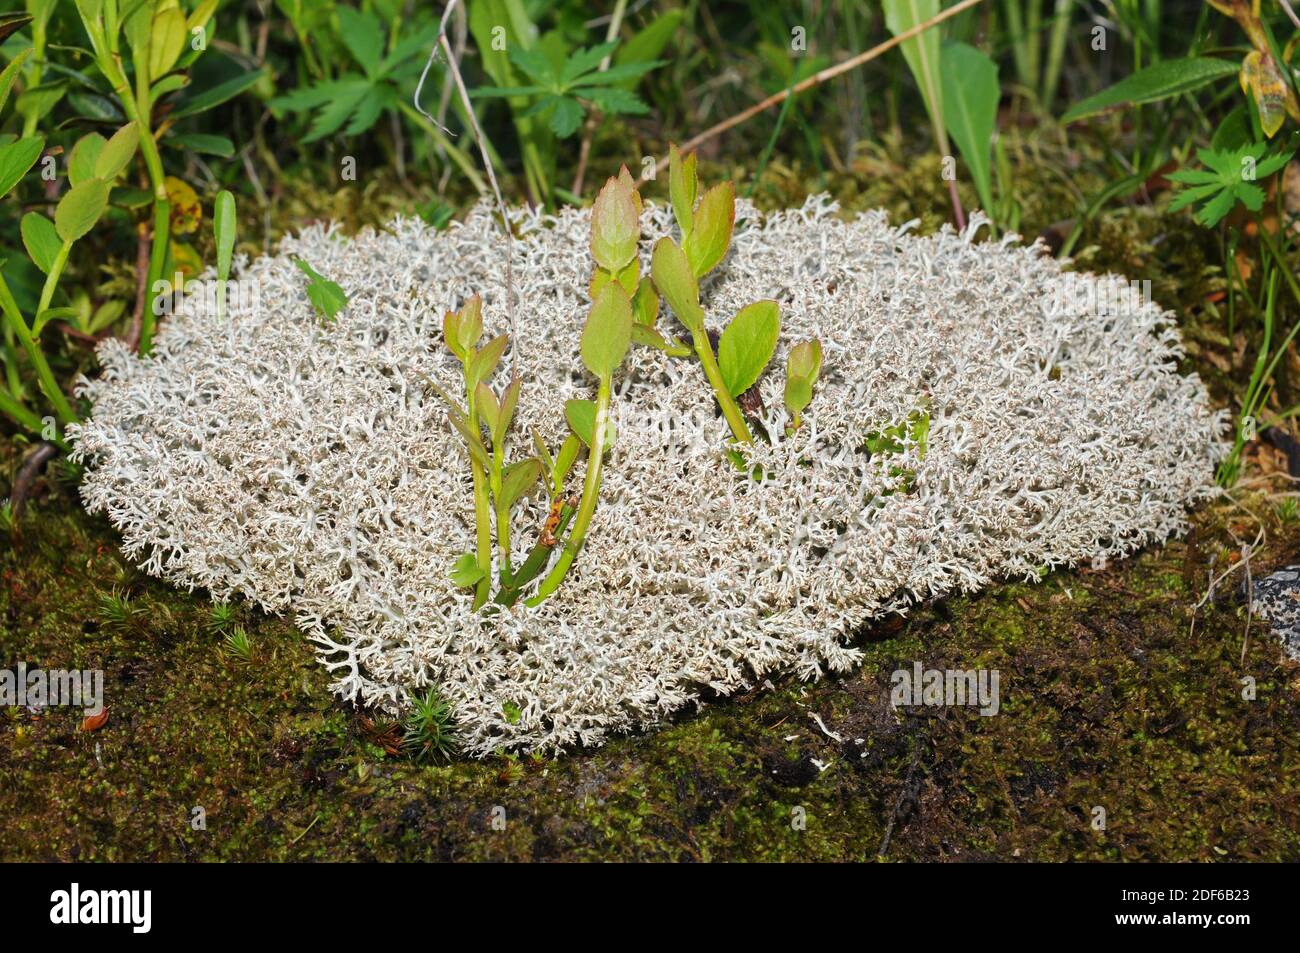 Reindeer lichen or caribou moss (Cladonia rangiferina) is an important foot for reindeers. Fungi. Ascomycota. Cladoniaceae. This photo was taken in Stock Photo